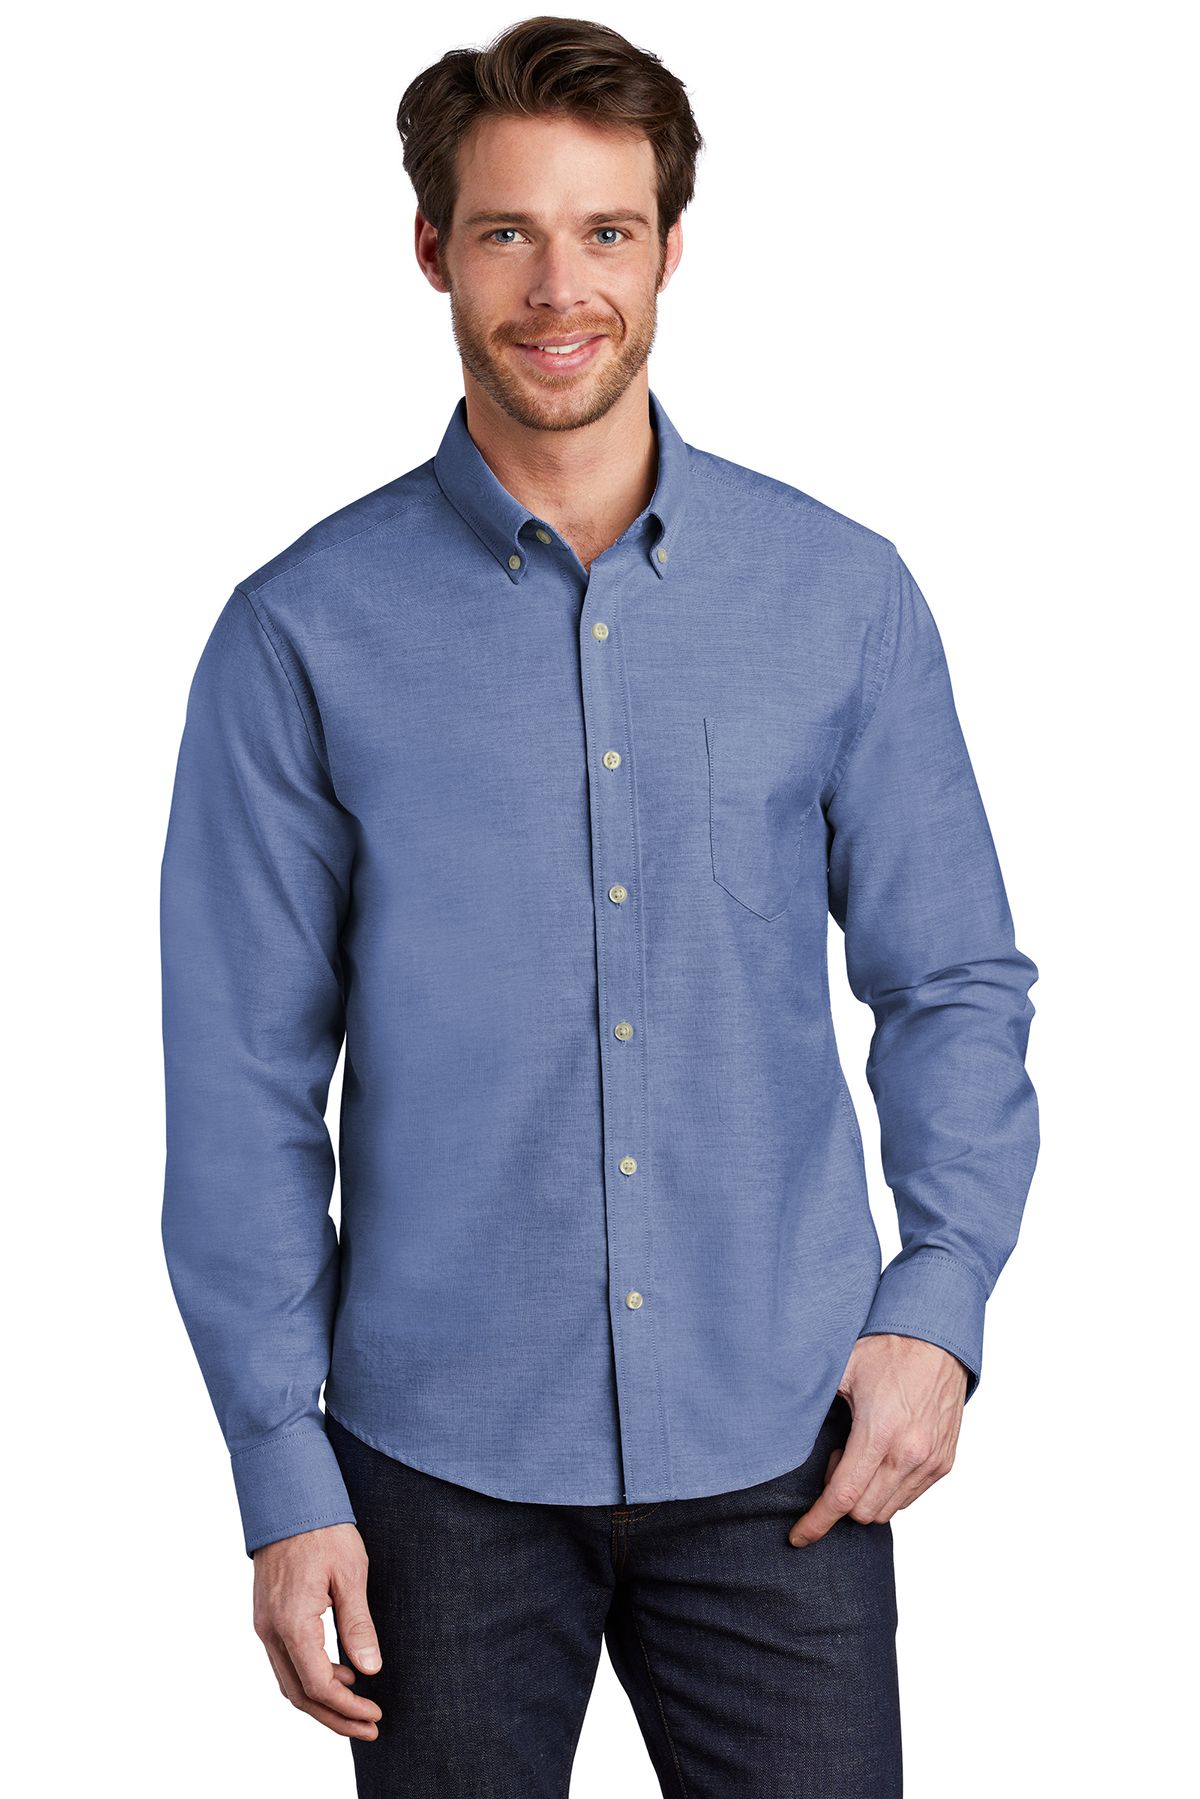 Port Authority S651 - Untucked Fit SuperPro Oxford Shirt